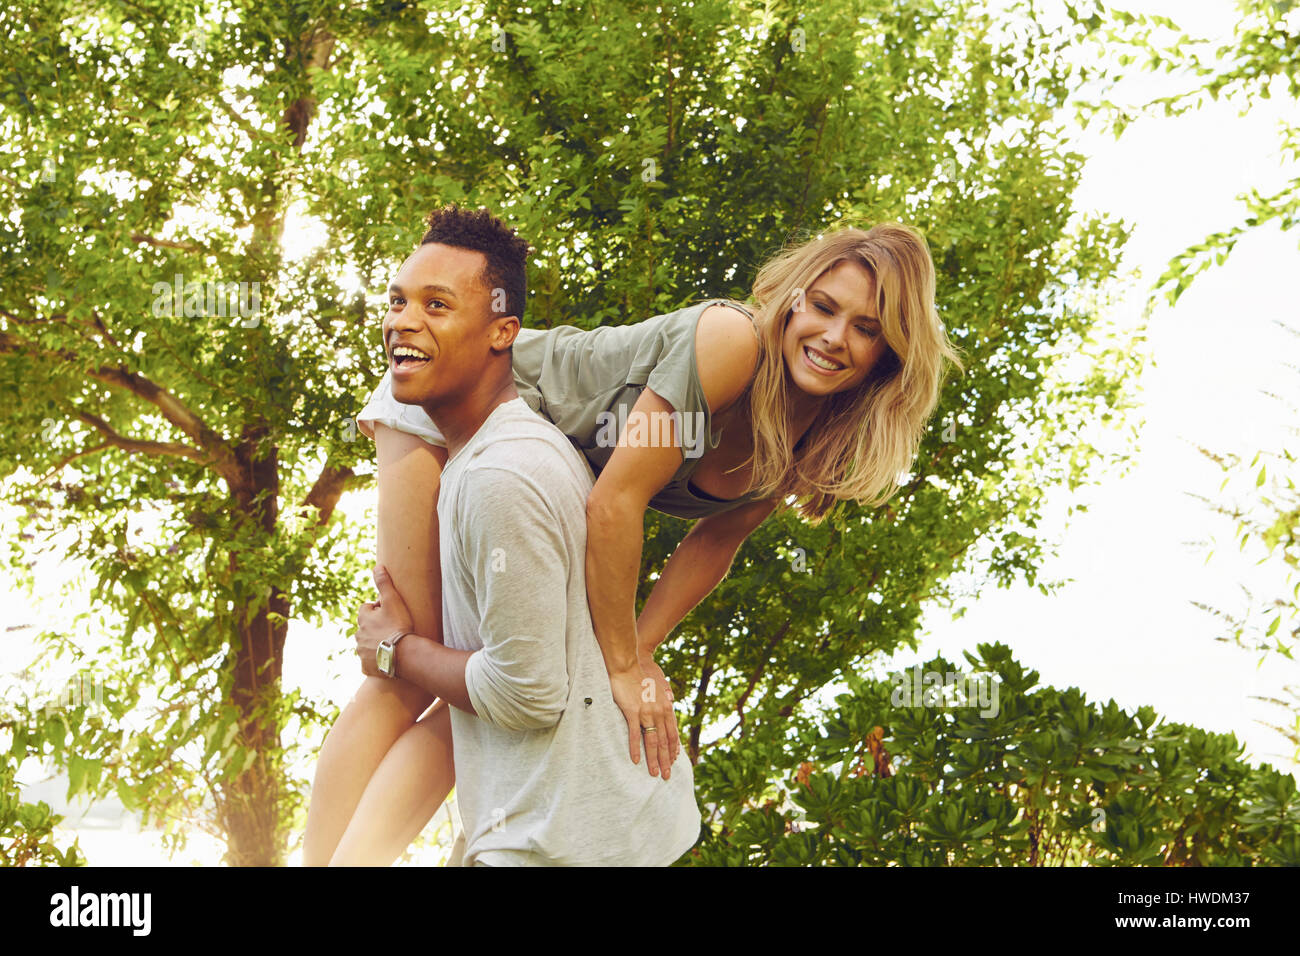 Young man carrying female friend over his shoulder in park Stock Photo